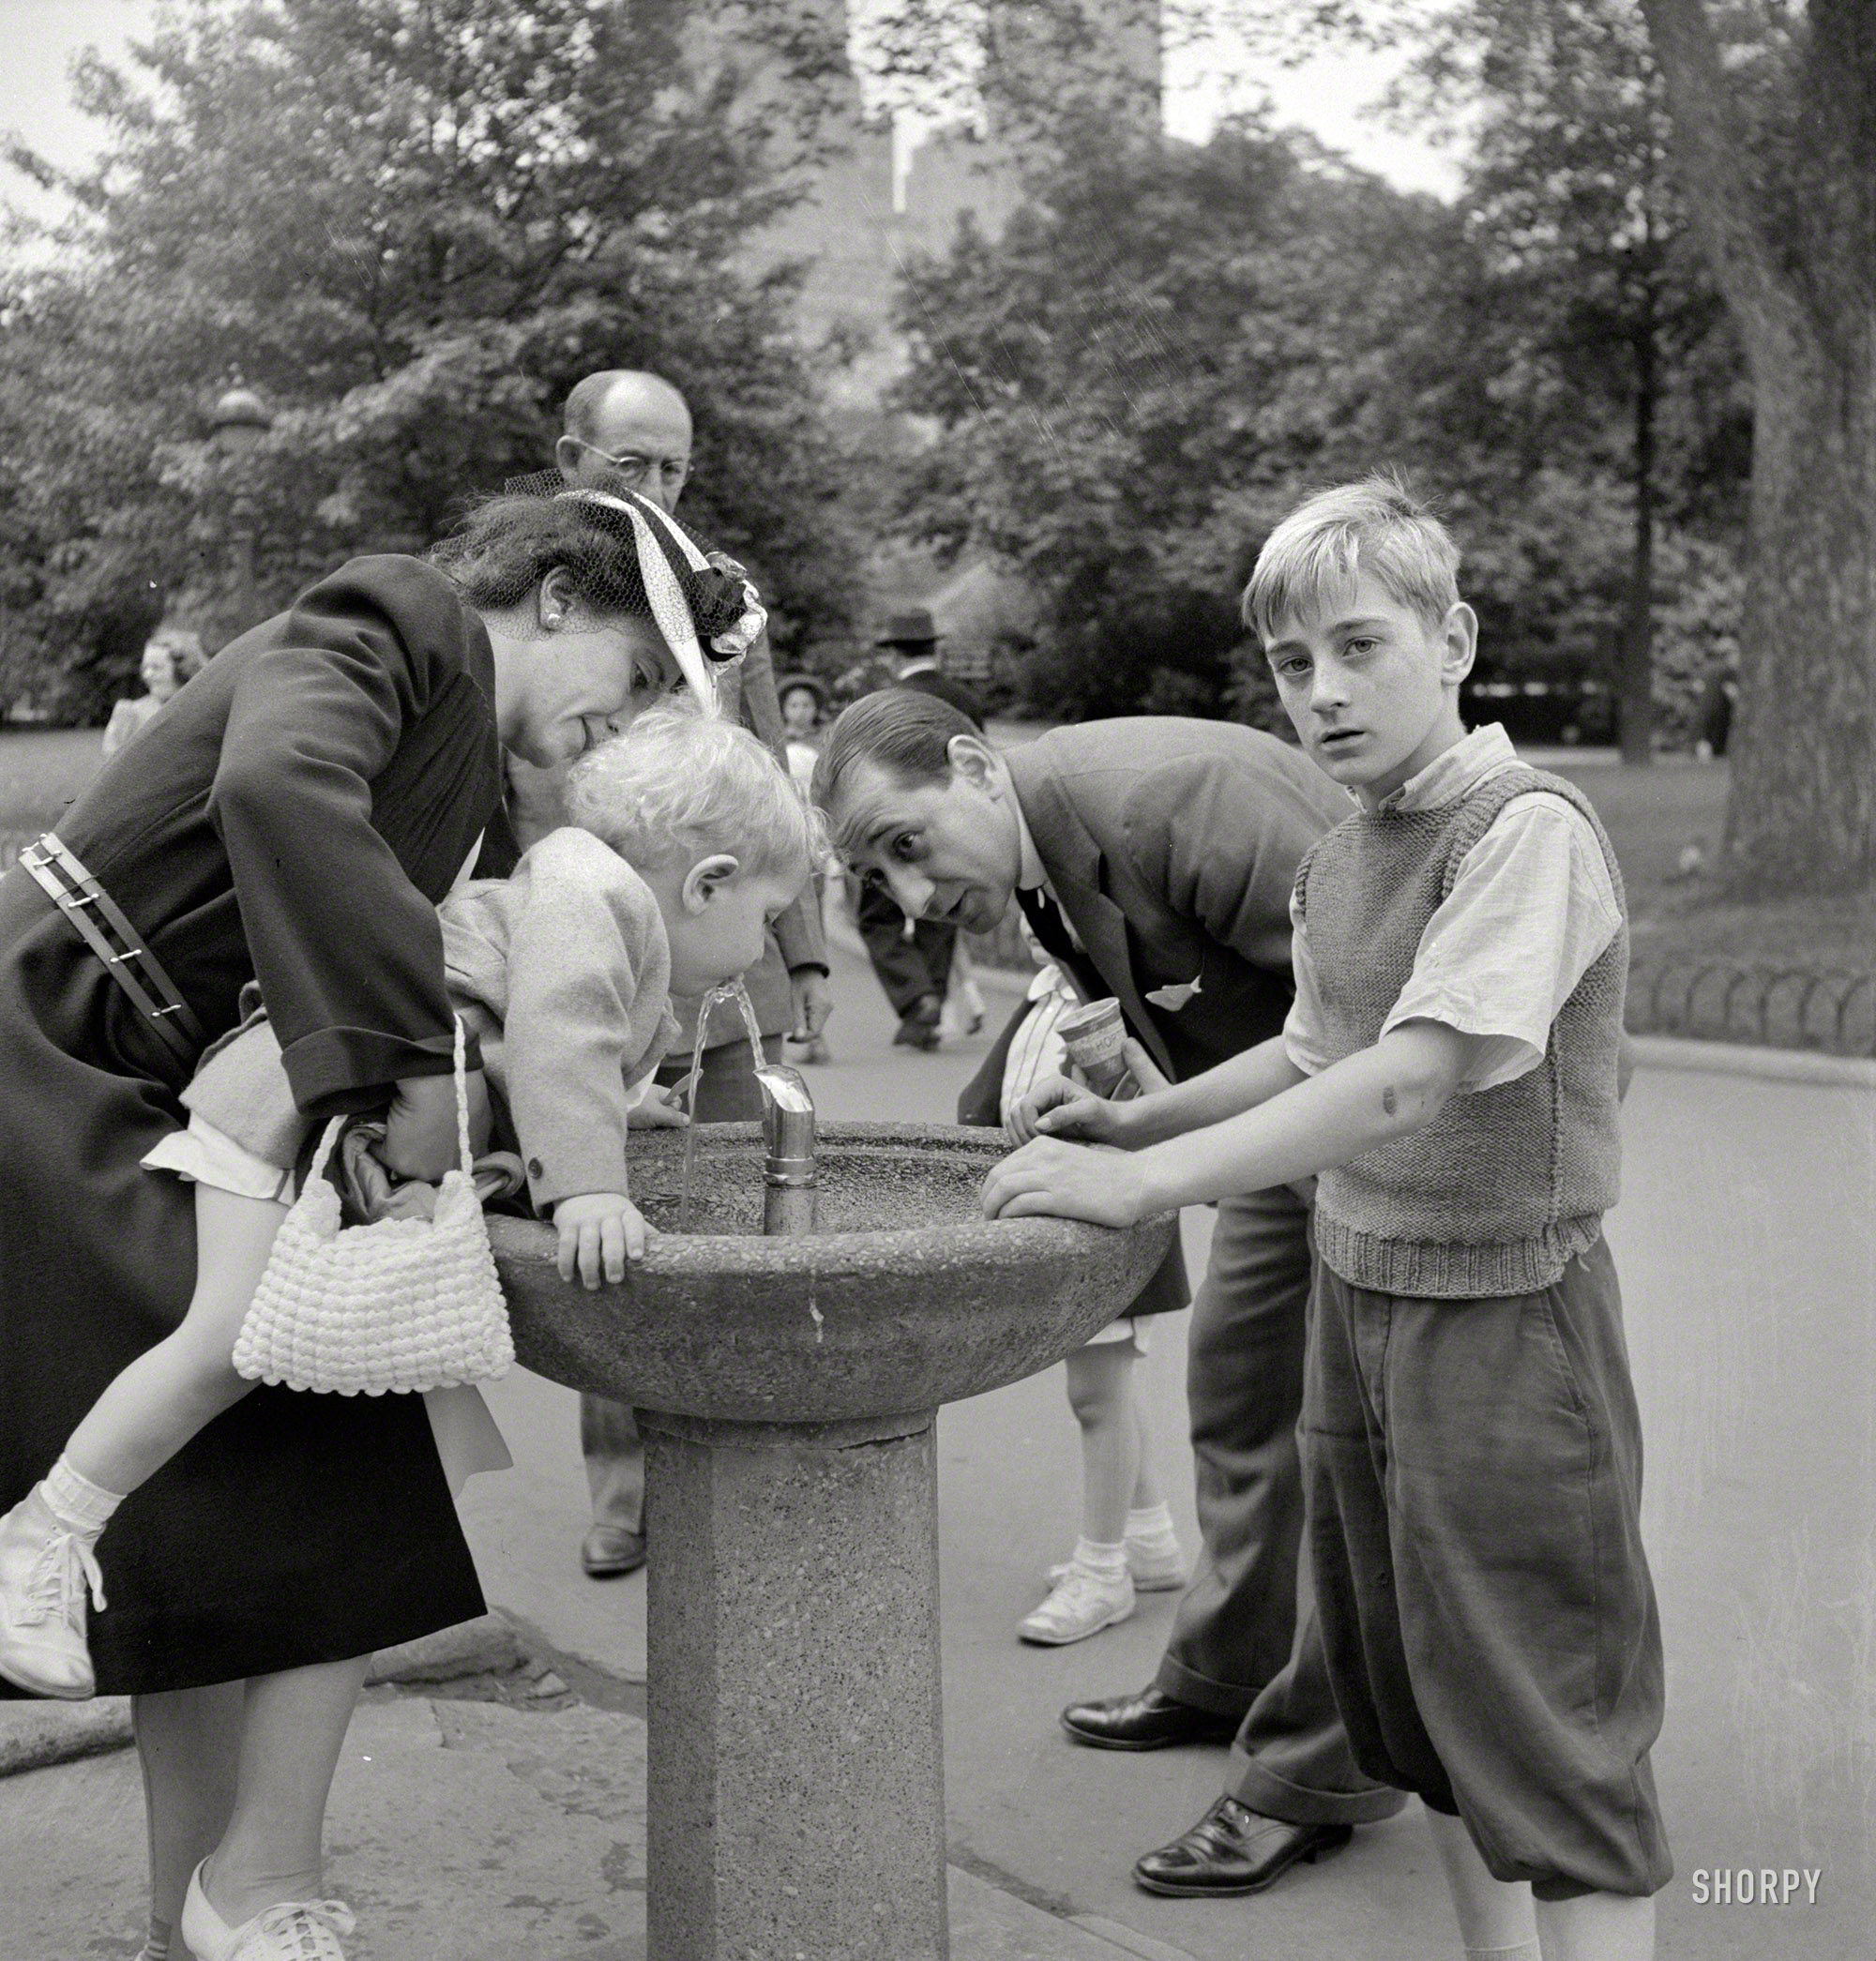 September 1942. "New York. Drinking fountain in Central Park on Sunday." Photo by Marjory Collins for the Office of War Information. View full size.